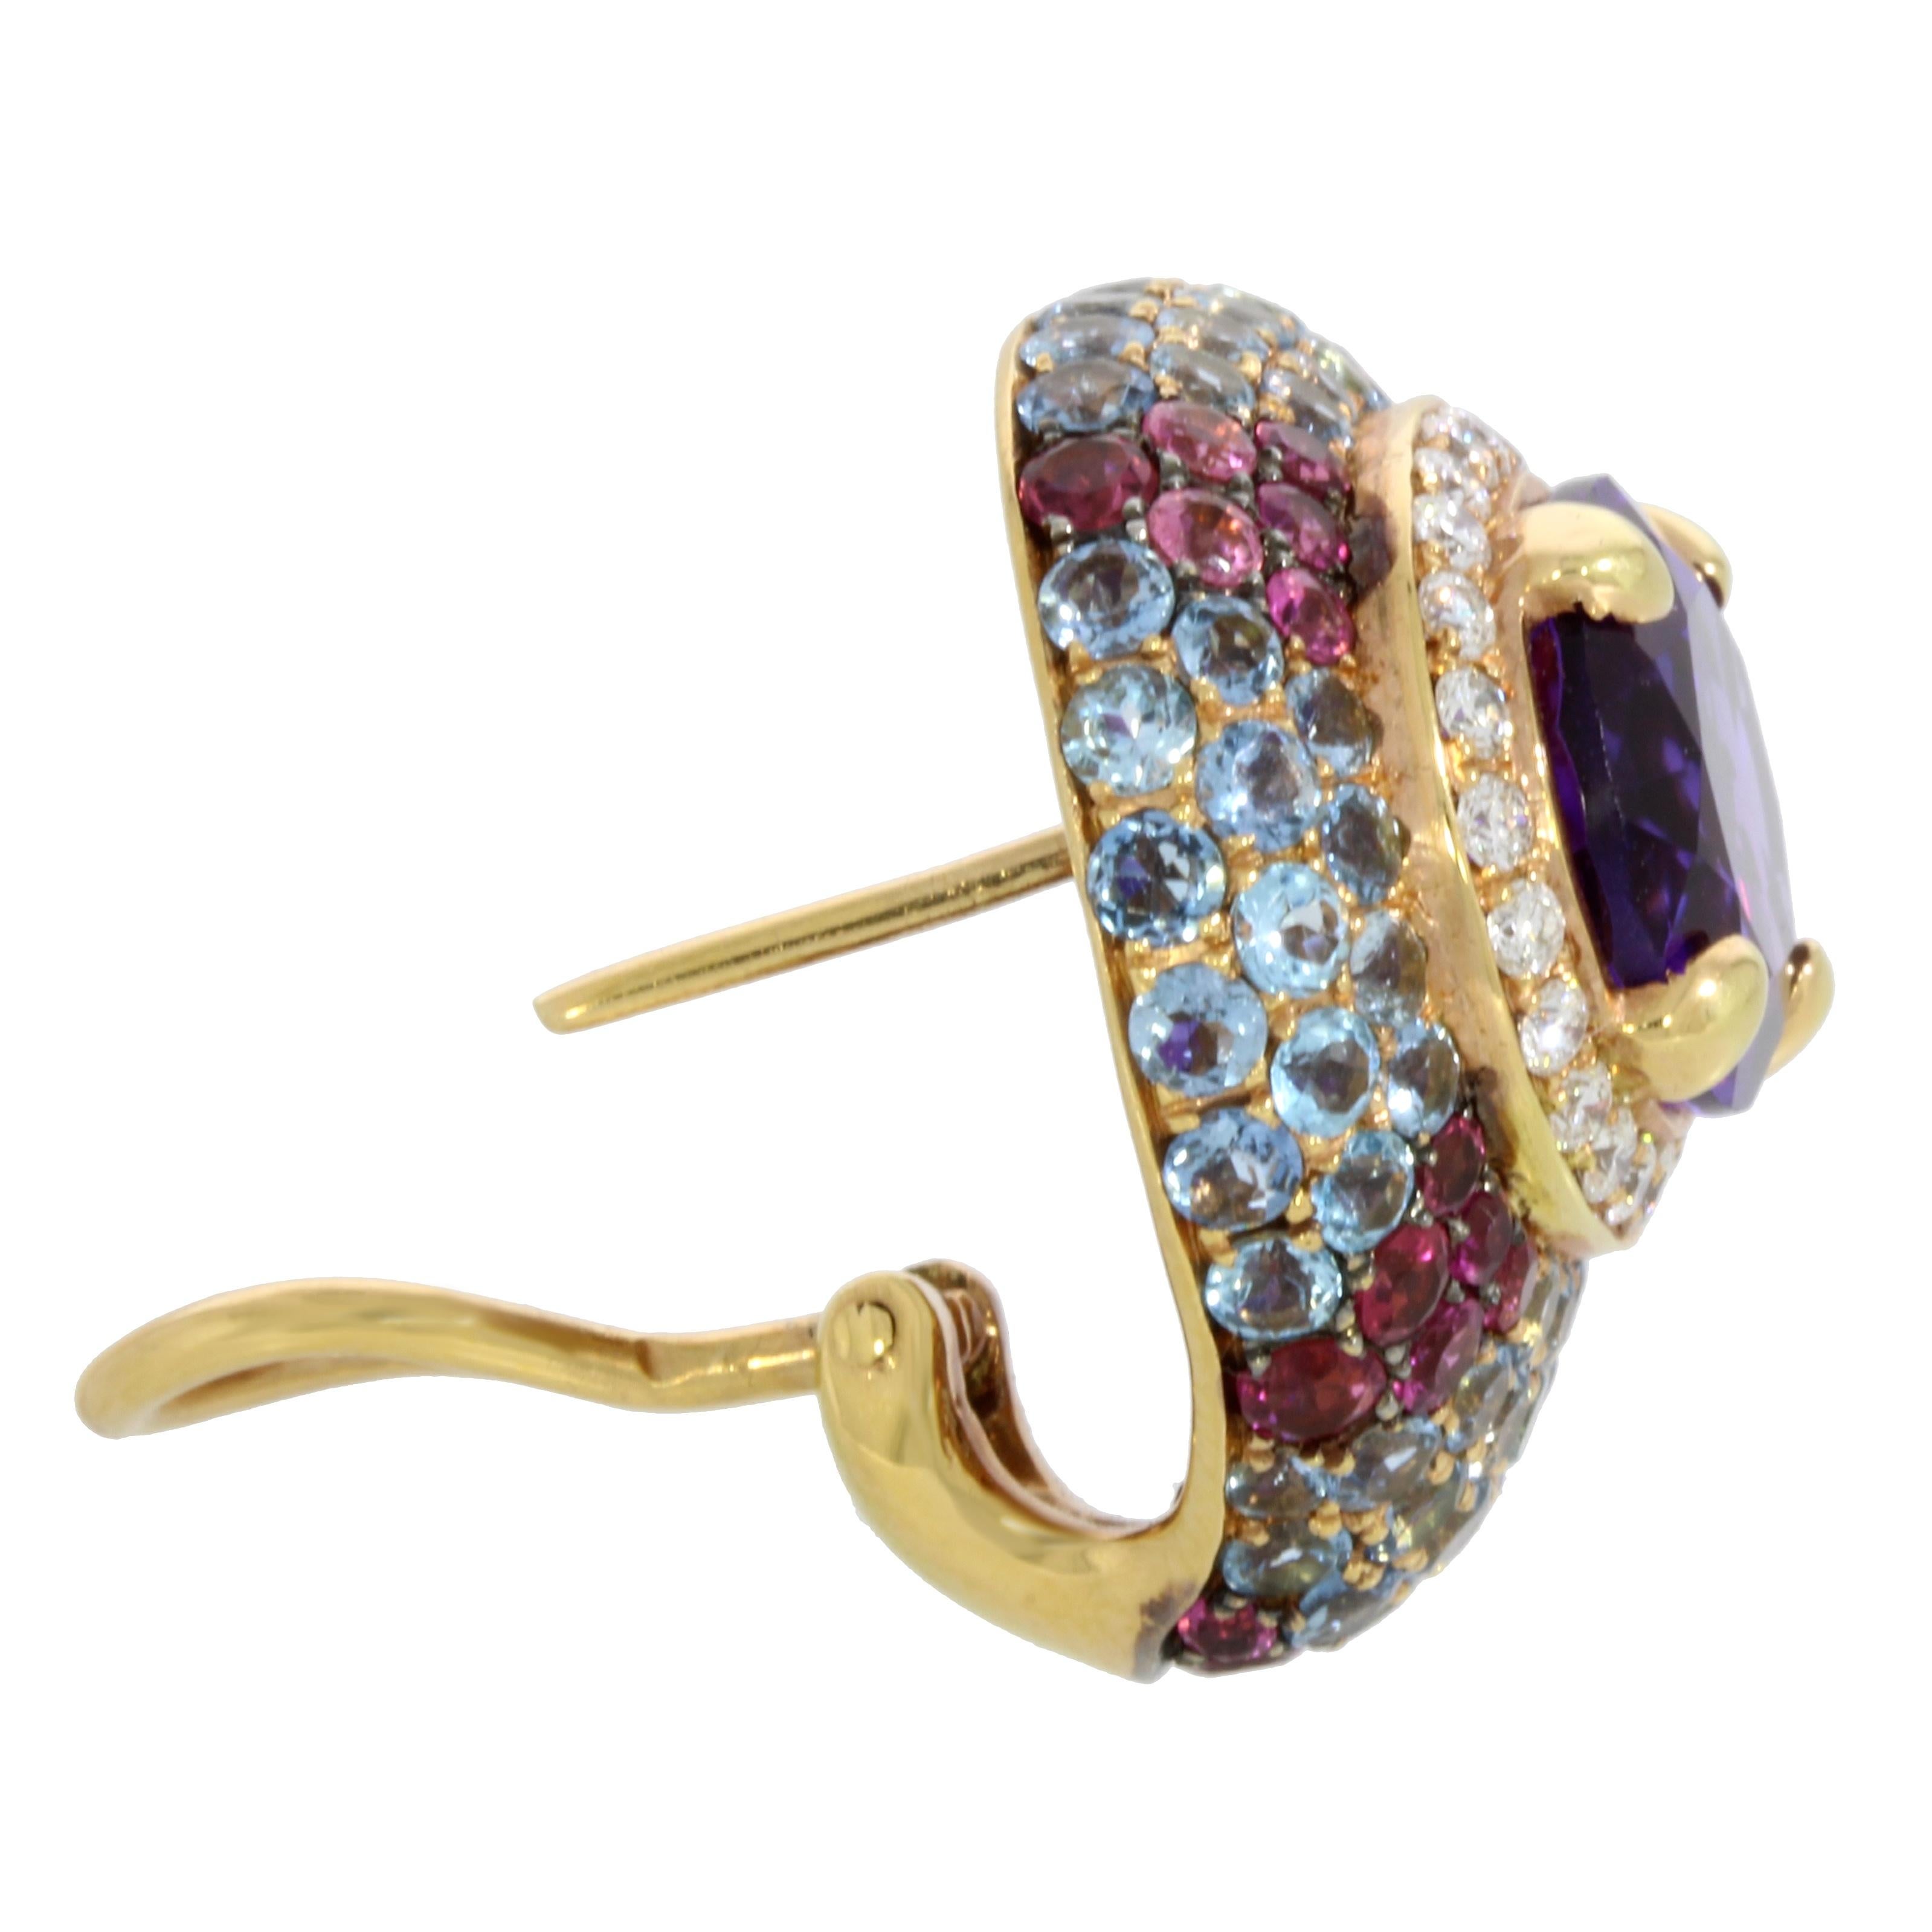 Contemporary 18 Karat Rose Gold Amethyst Aquamarine Rubellite Venice Earrings by Niquesa For Sale